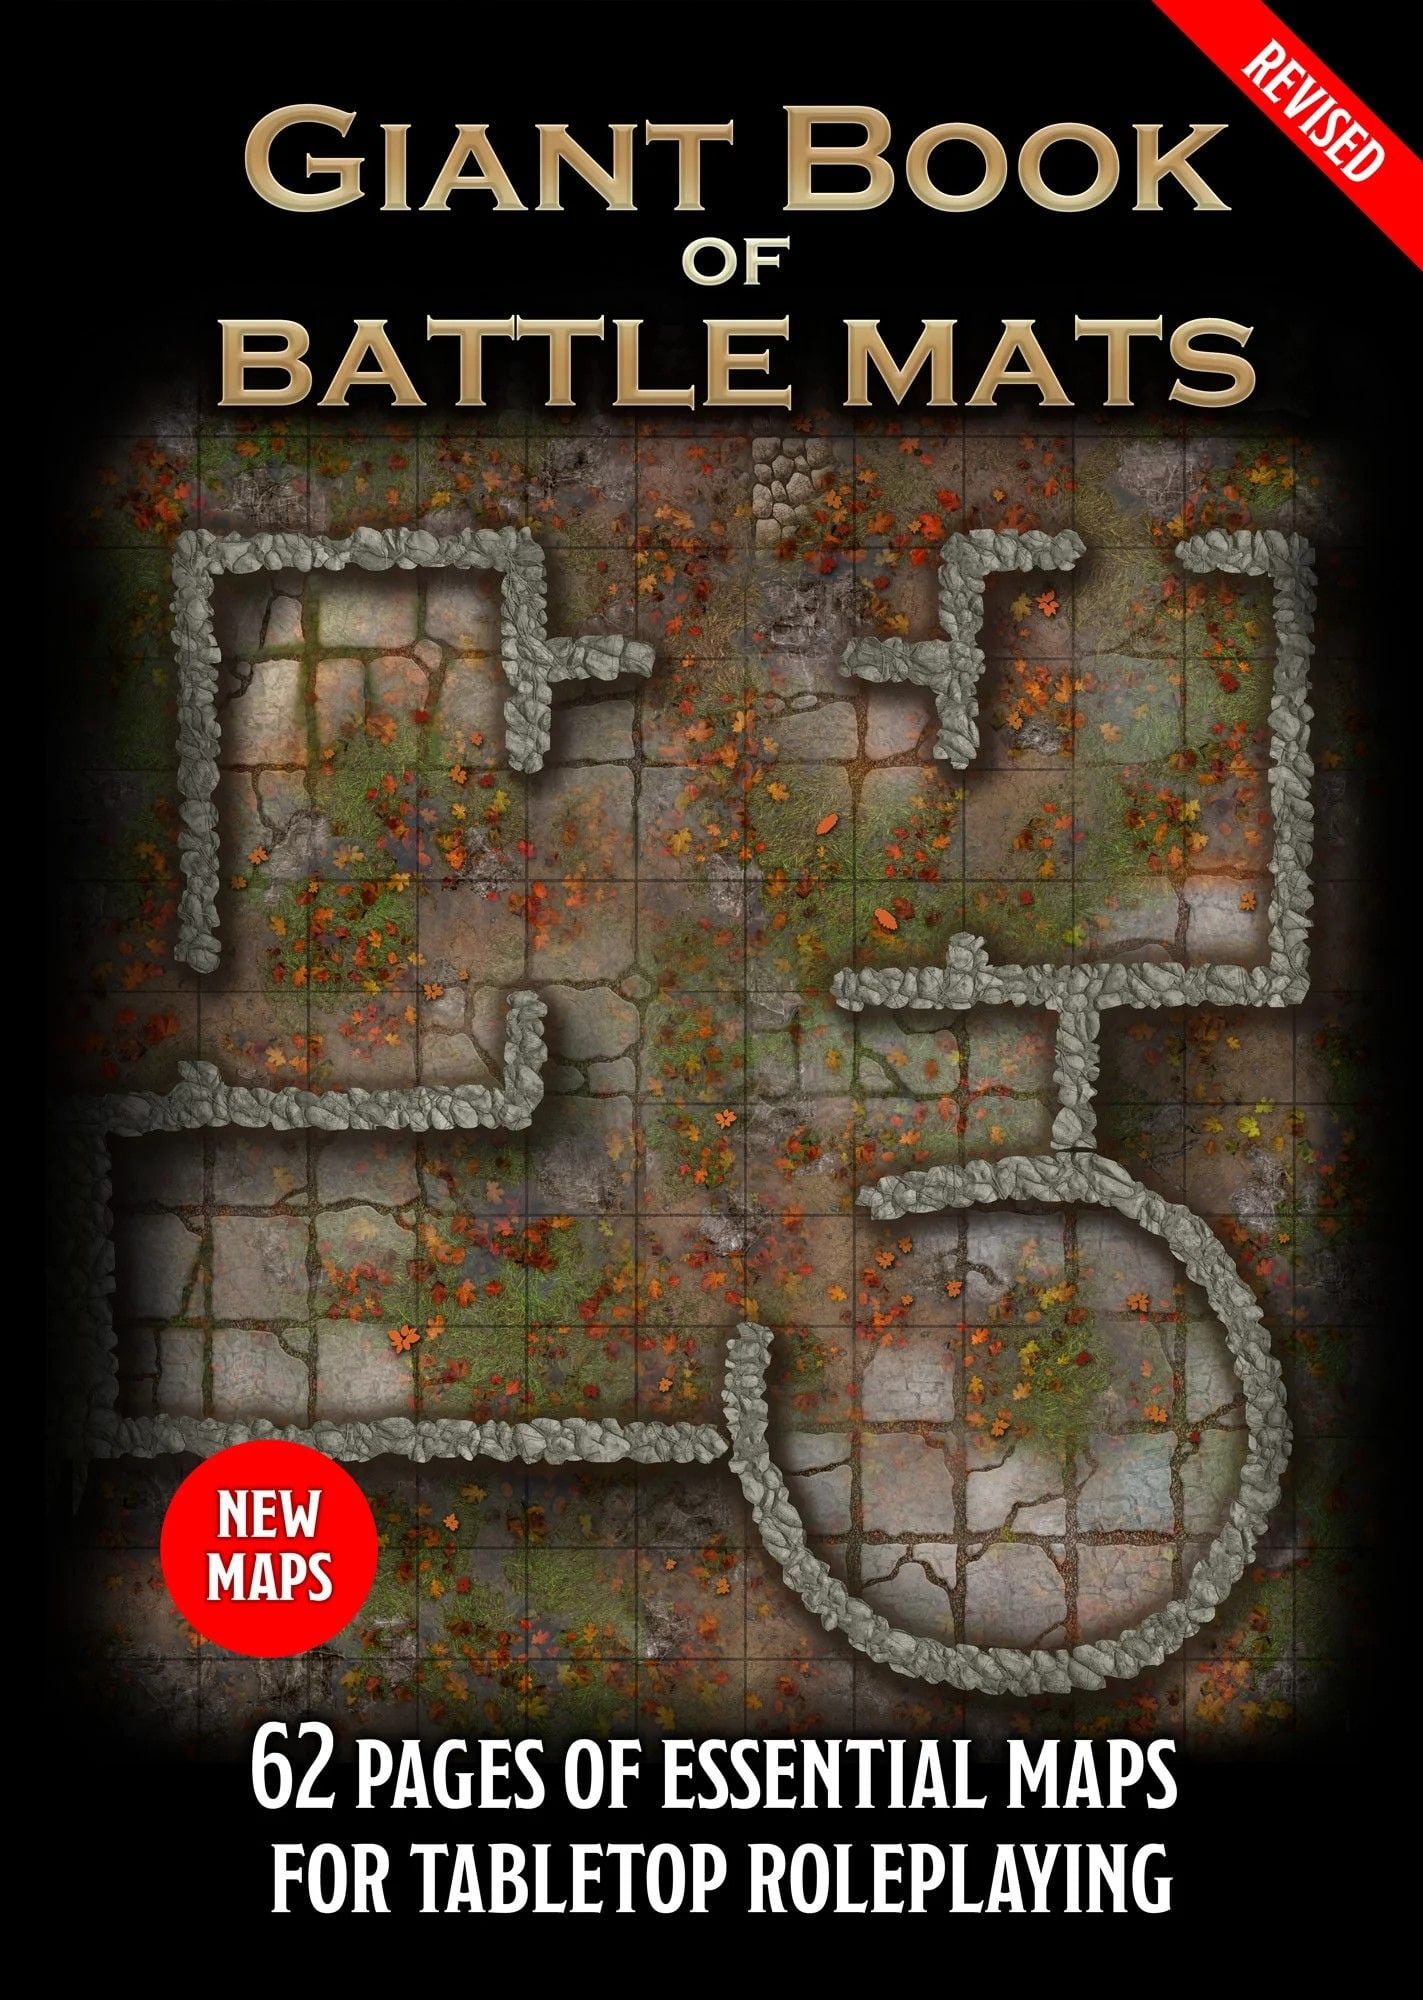 The Revised Giant Book of Battle Mats